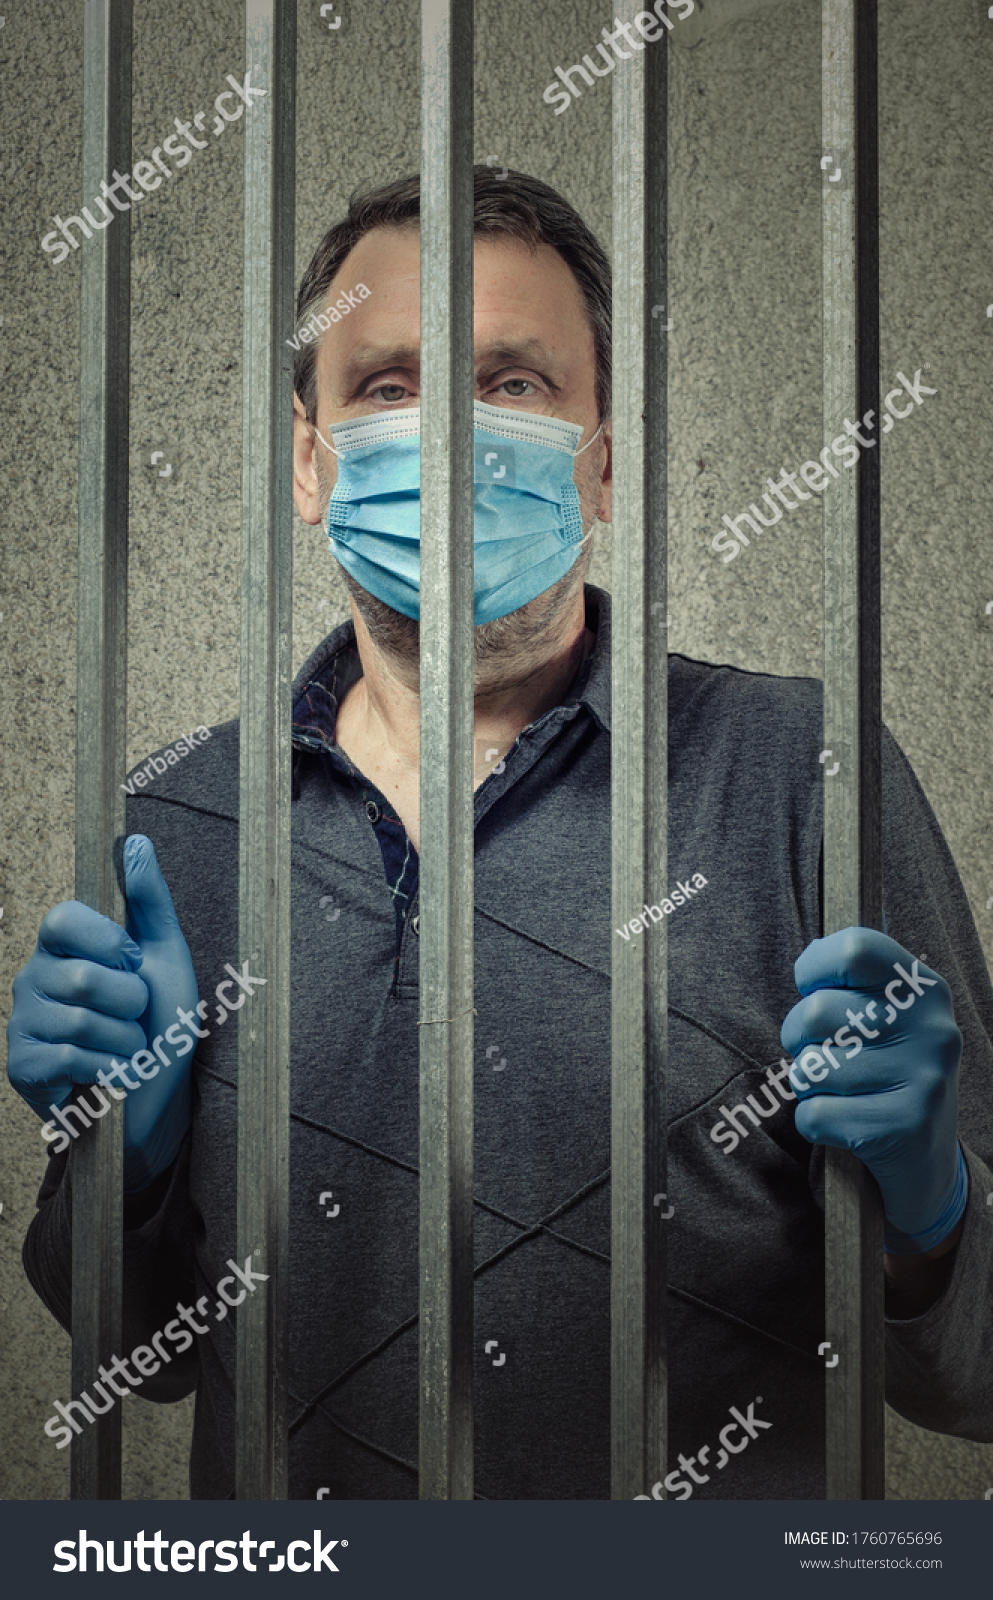 A middle-aged man in a blue medical face mask and blue gloves is looking through the bars of a pre-detention cell. He was arrested for a quarantine violation. #1760765696